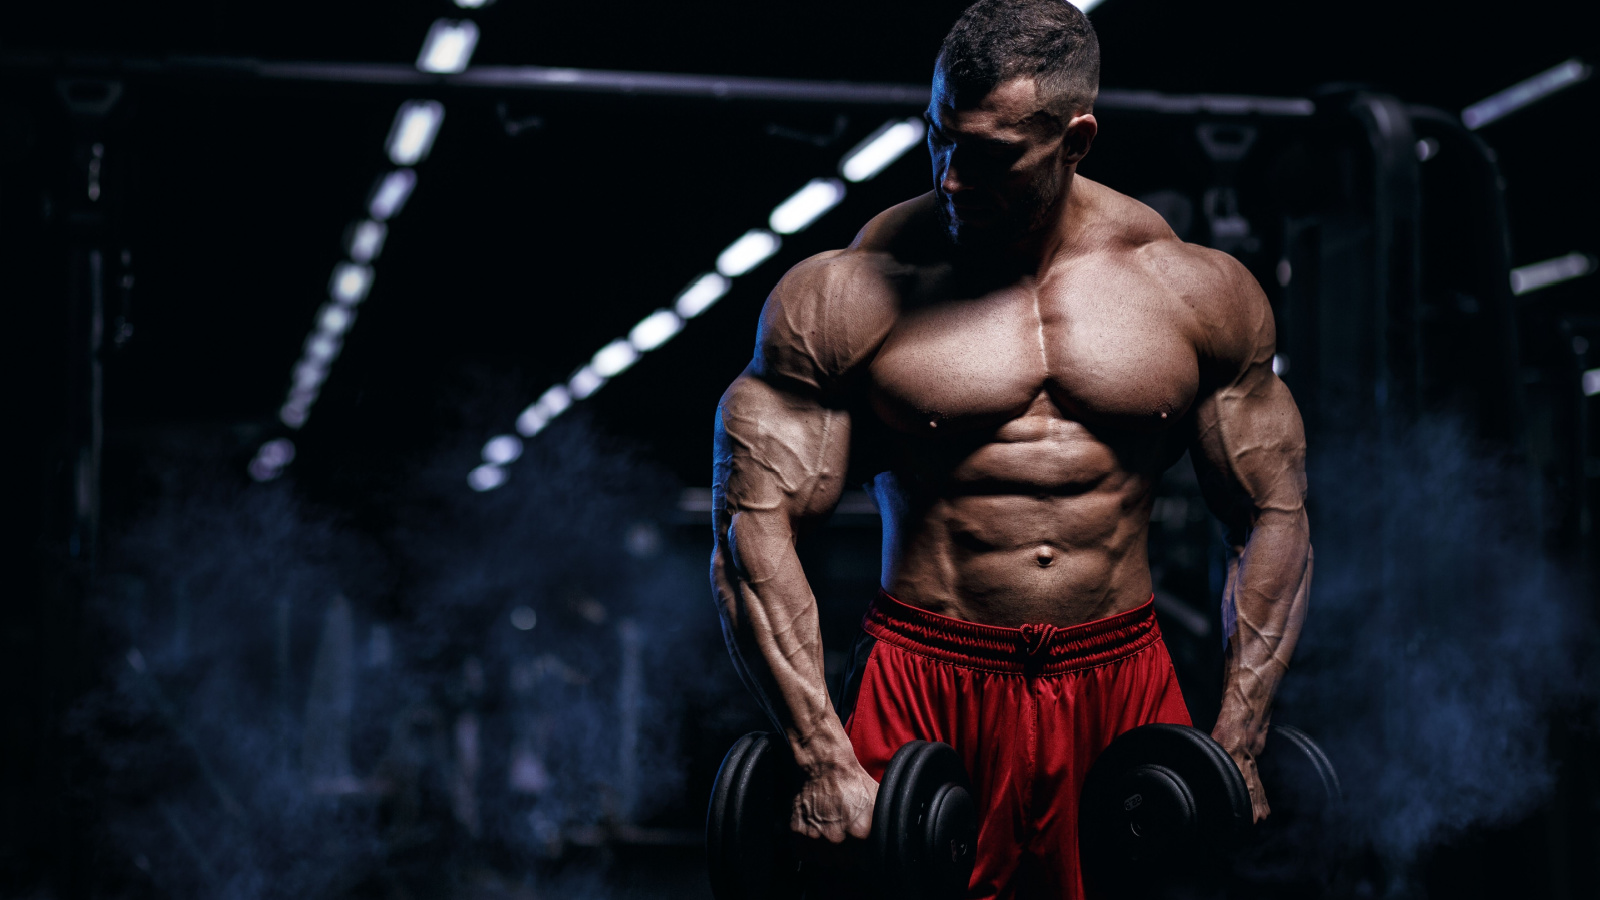 Simplyshredded.com  The Ultimate Lifting Experience - Bulked vs